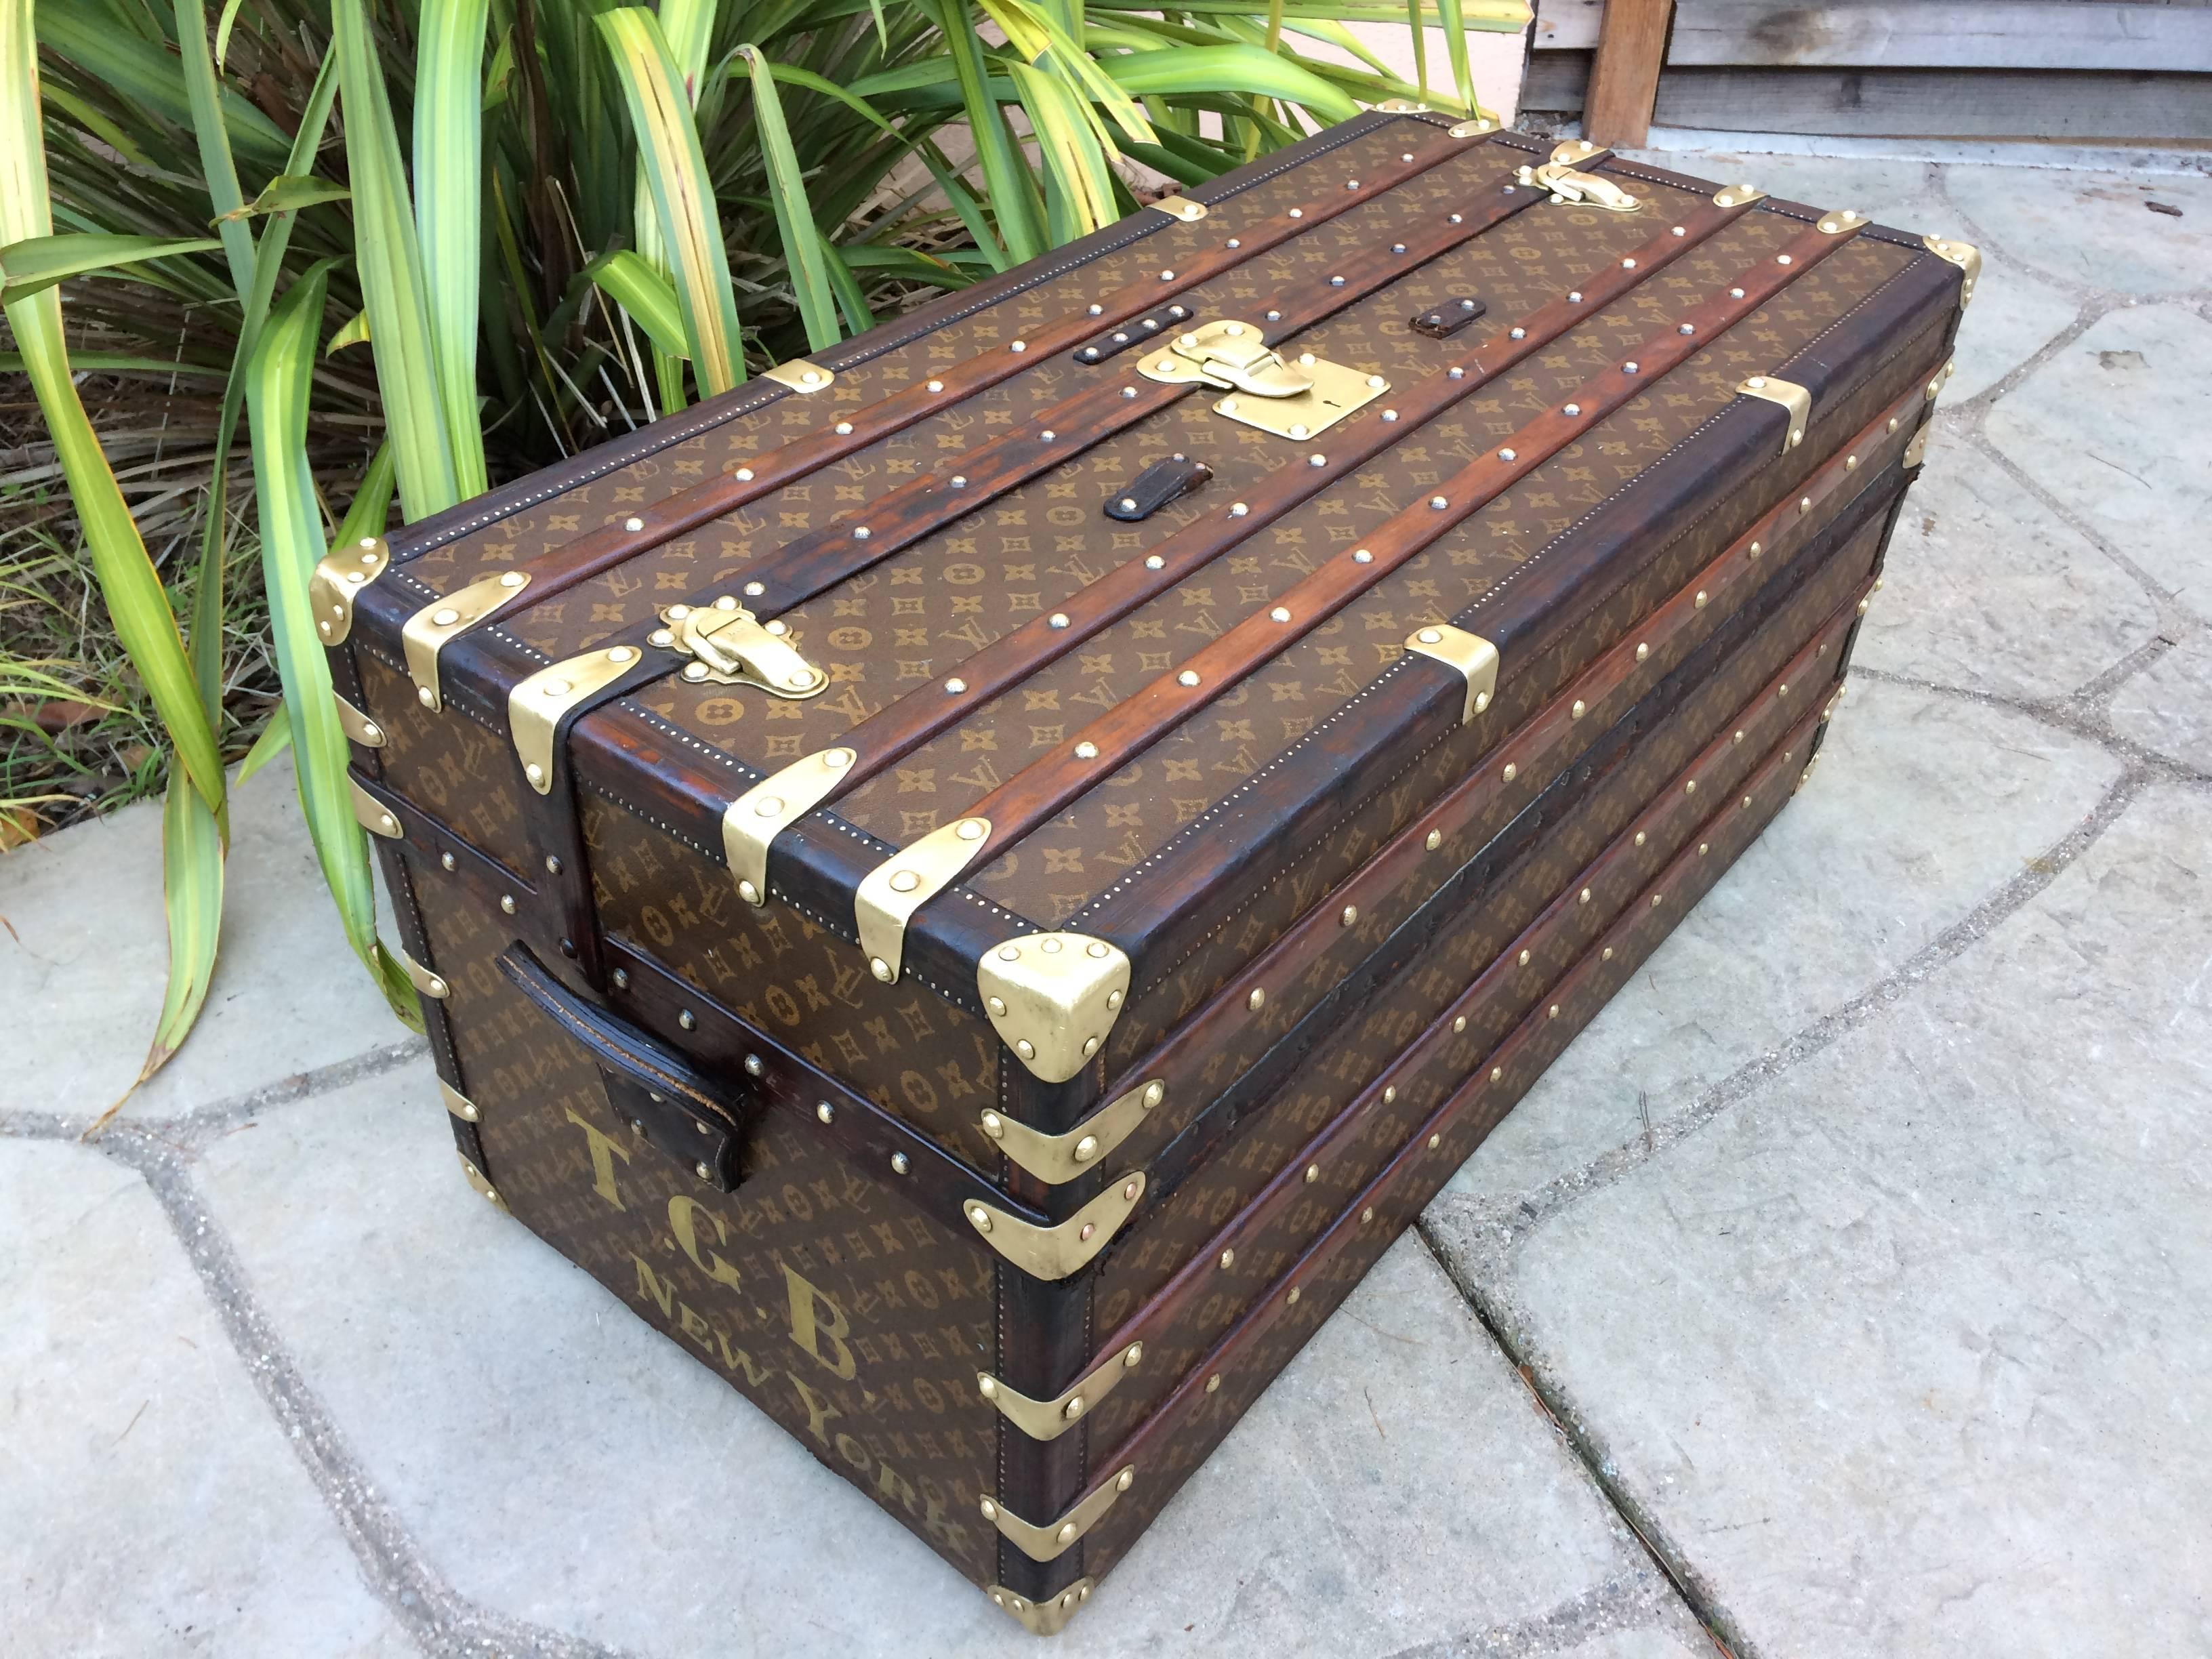 Magnificent unrestored original untouched antique Louis Vuitton ideal steamer wardrobe trunk. This trunk measures in inches 19 x 19 x 40. Please see pictures for details. We are one of the world's largest, most trusted sources for antique Louis